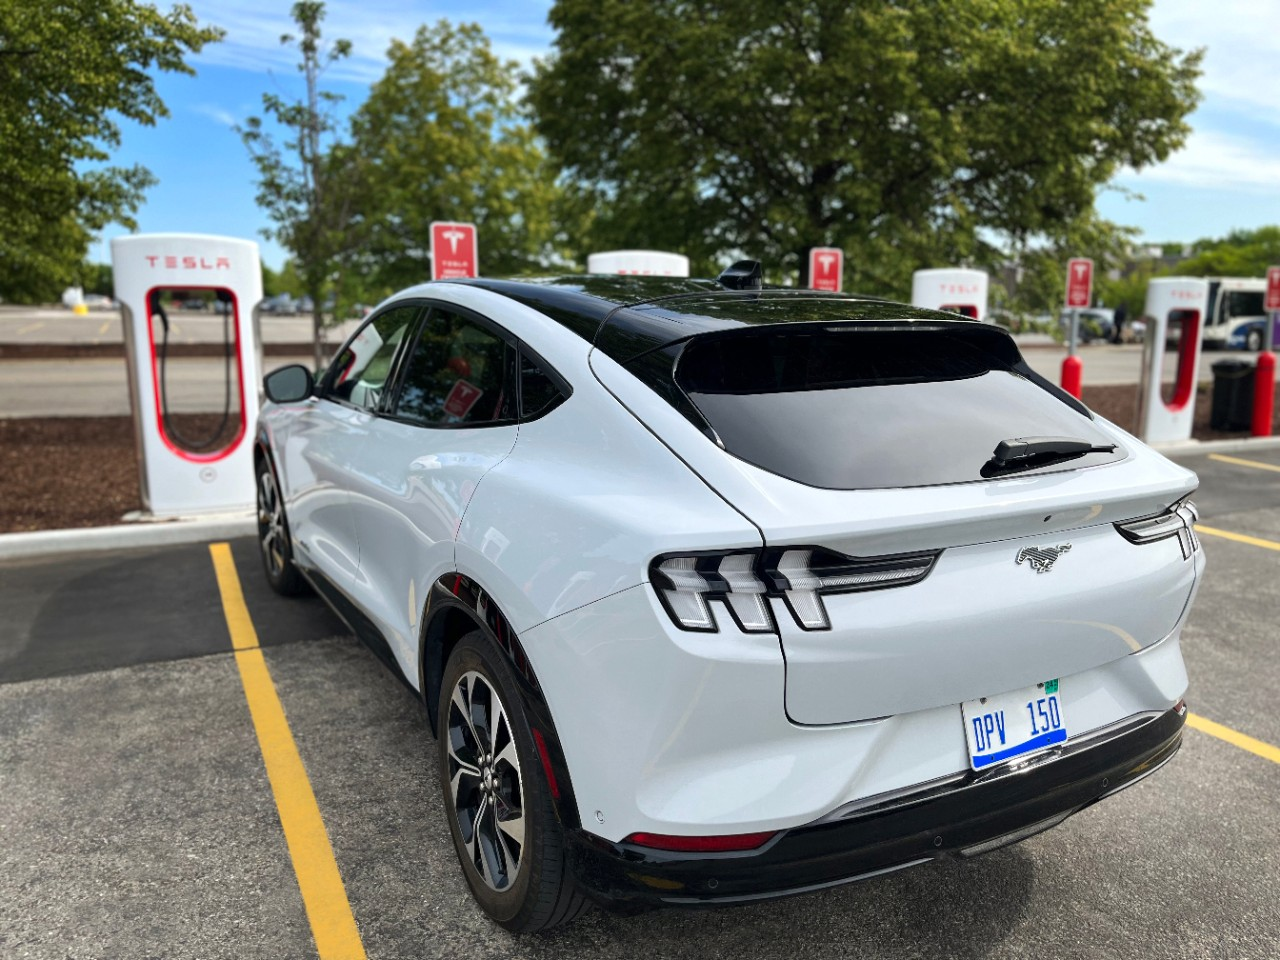 Ford EV Customers to Gain Access to 12,000 Tesla Superchargers